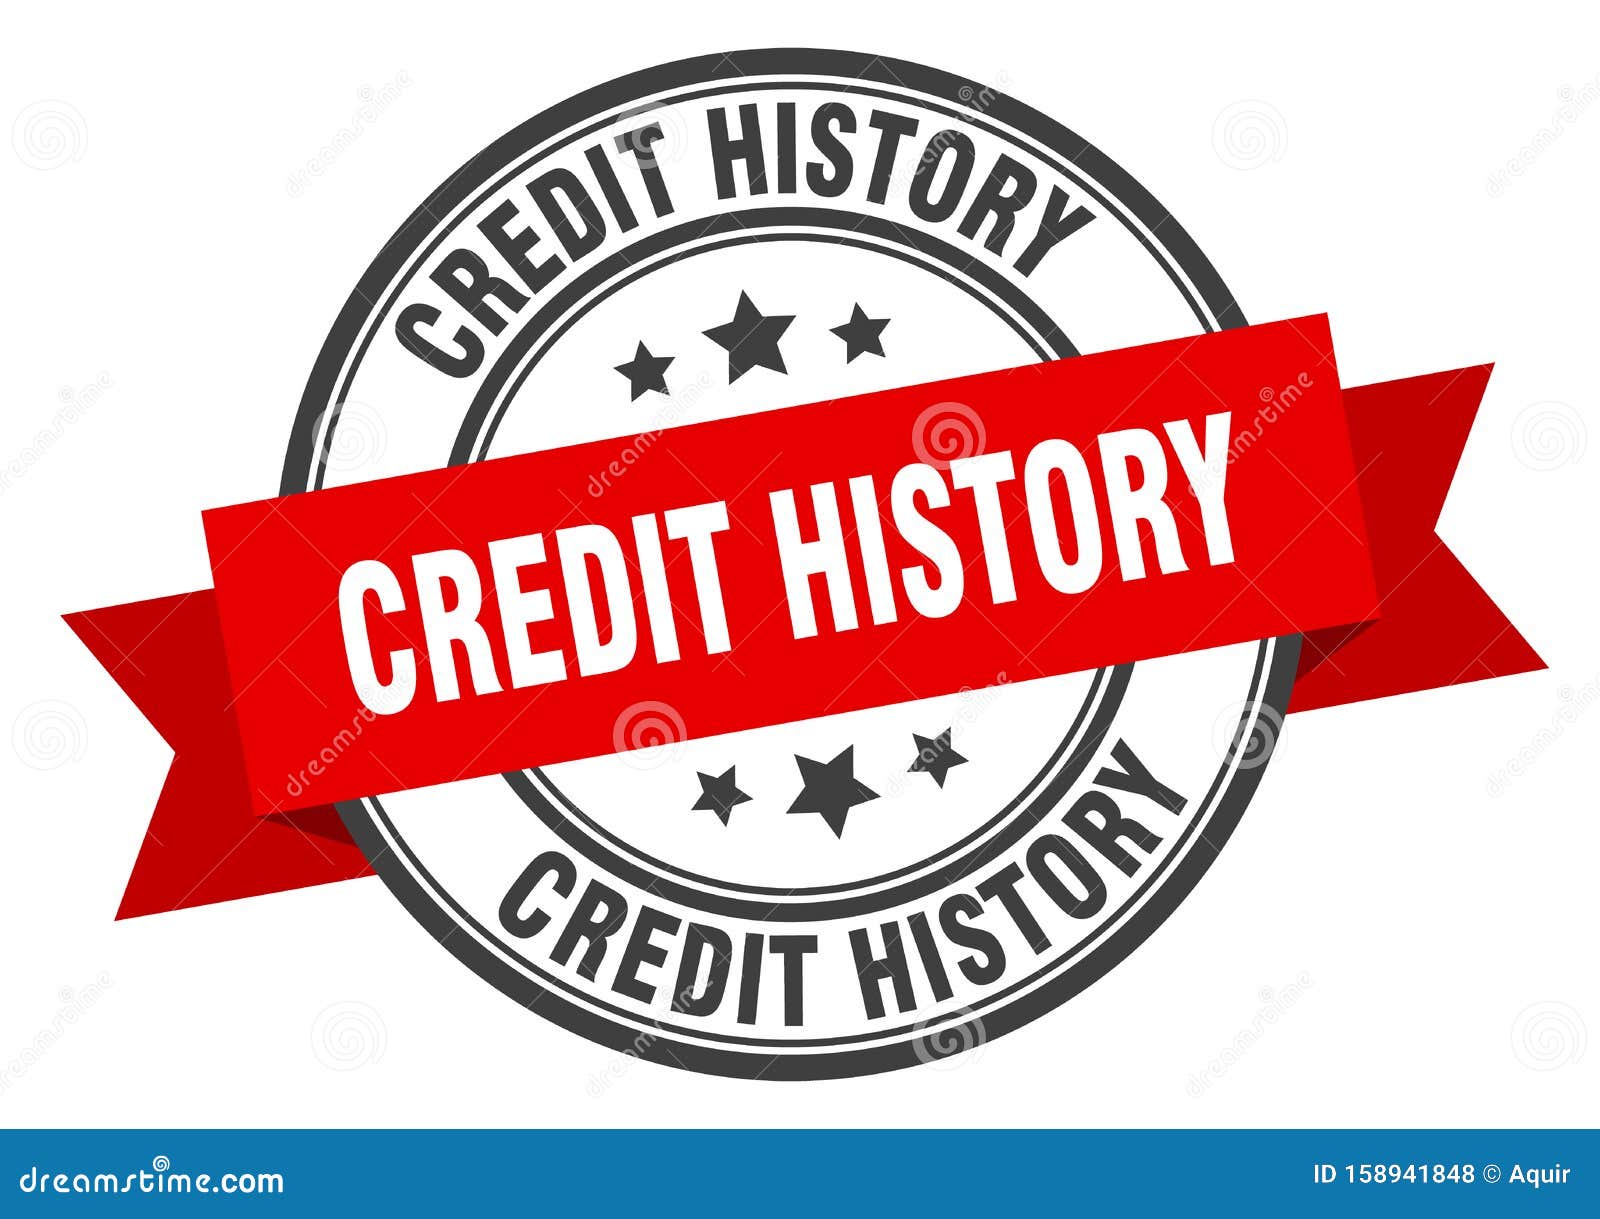 Credit history label stock vector. Illustration of vector - 158941848